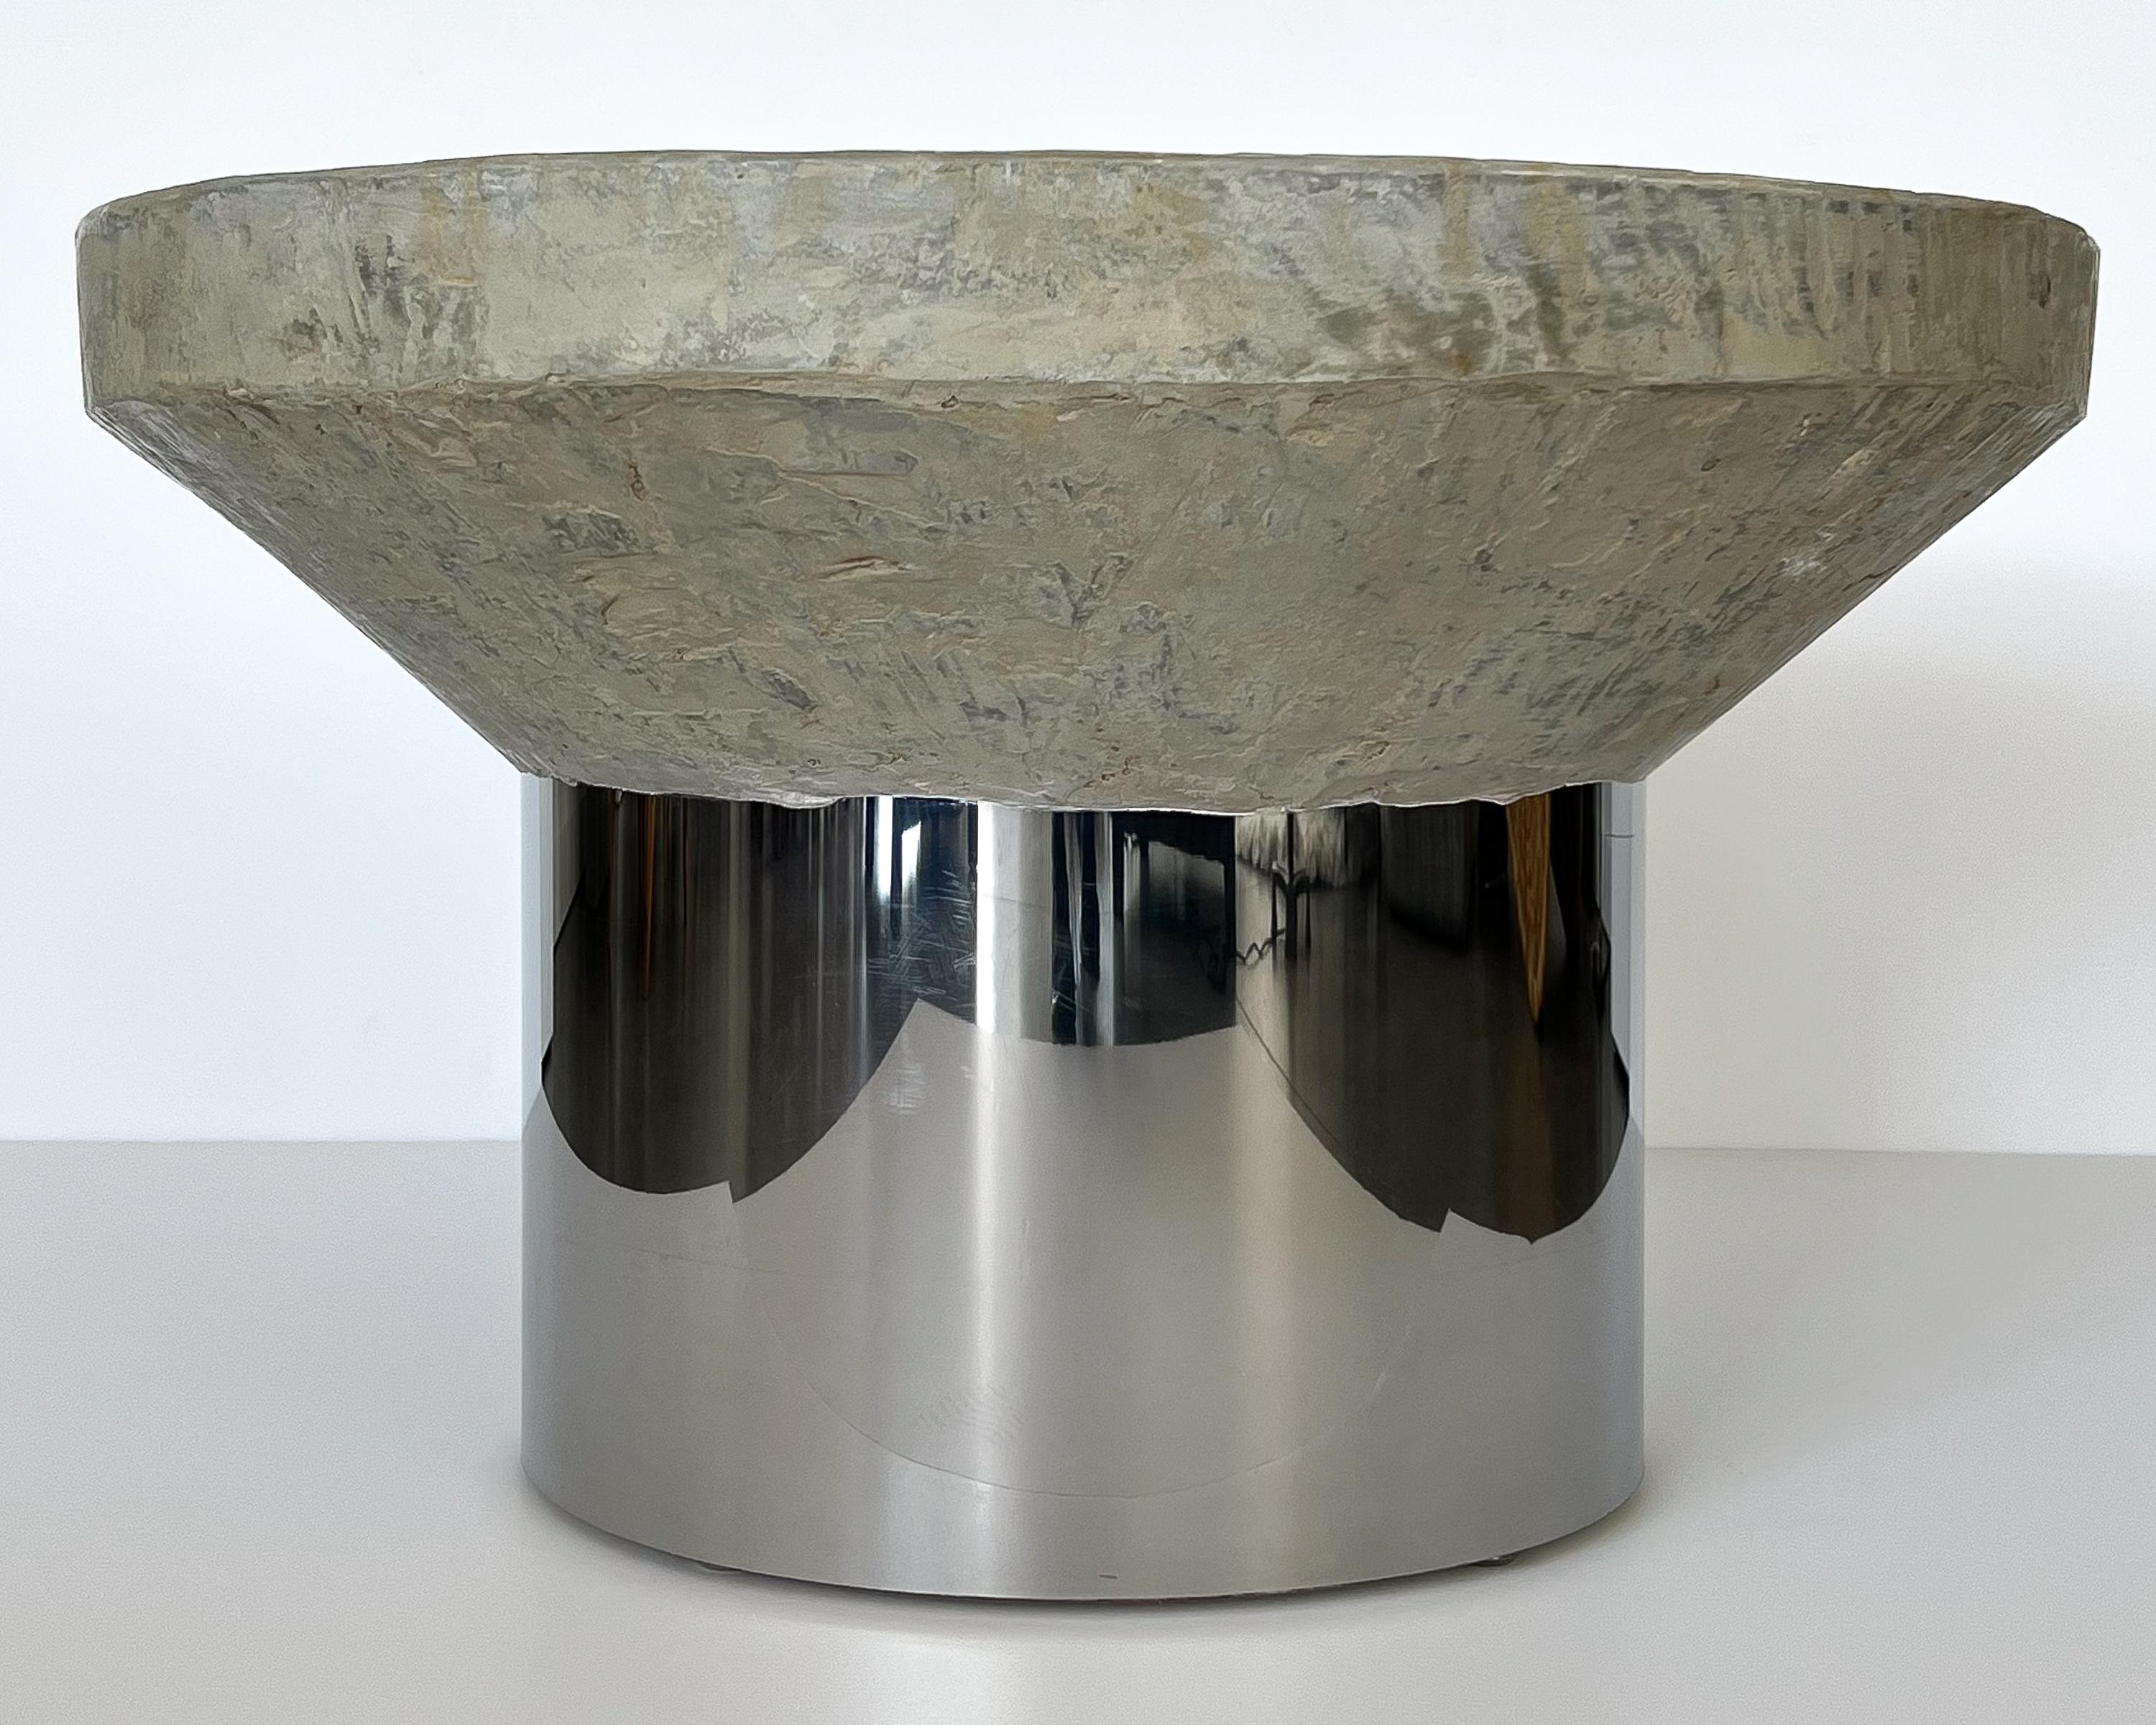 Unique faux cement / concrete and chrome pedestal coffee or end table, circa 1970s. Unknown designer. Highly textured resin faux cement top in pale gray and tan with a monolithic wedge design. The top measures 27.5